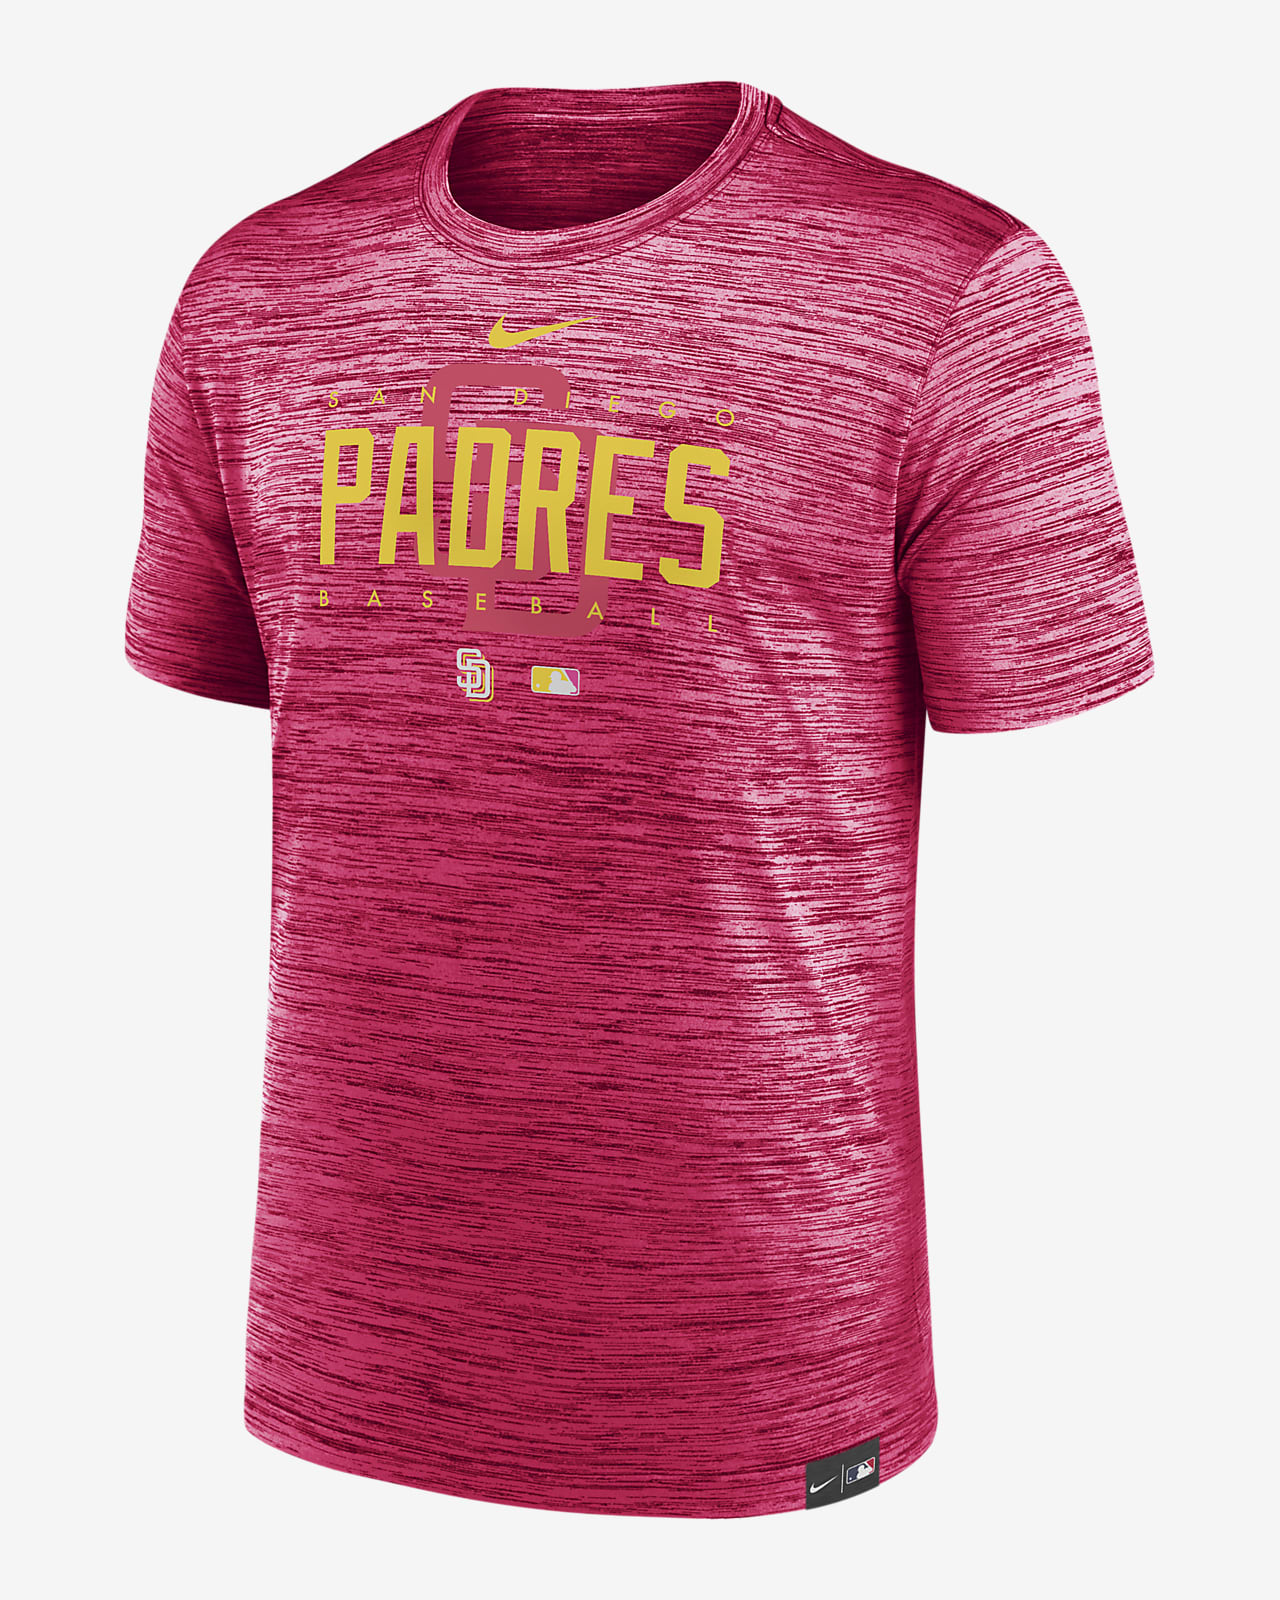 city connect padres shirt